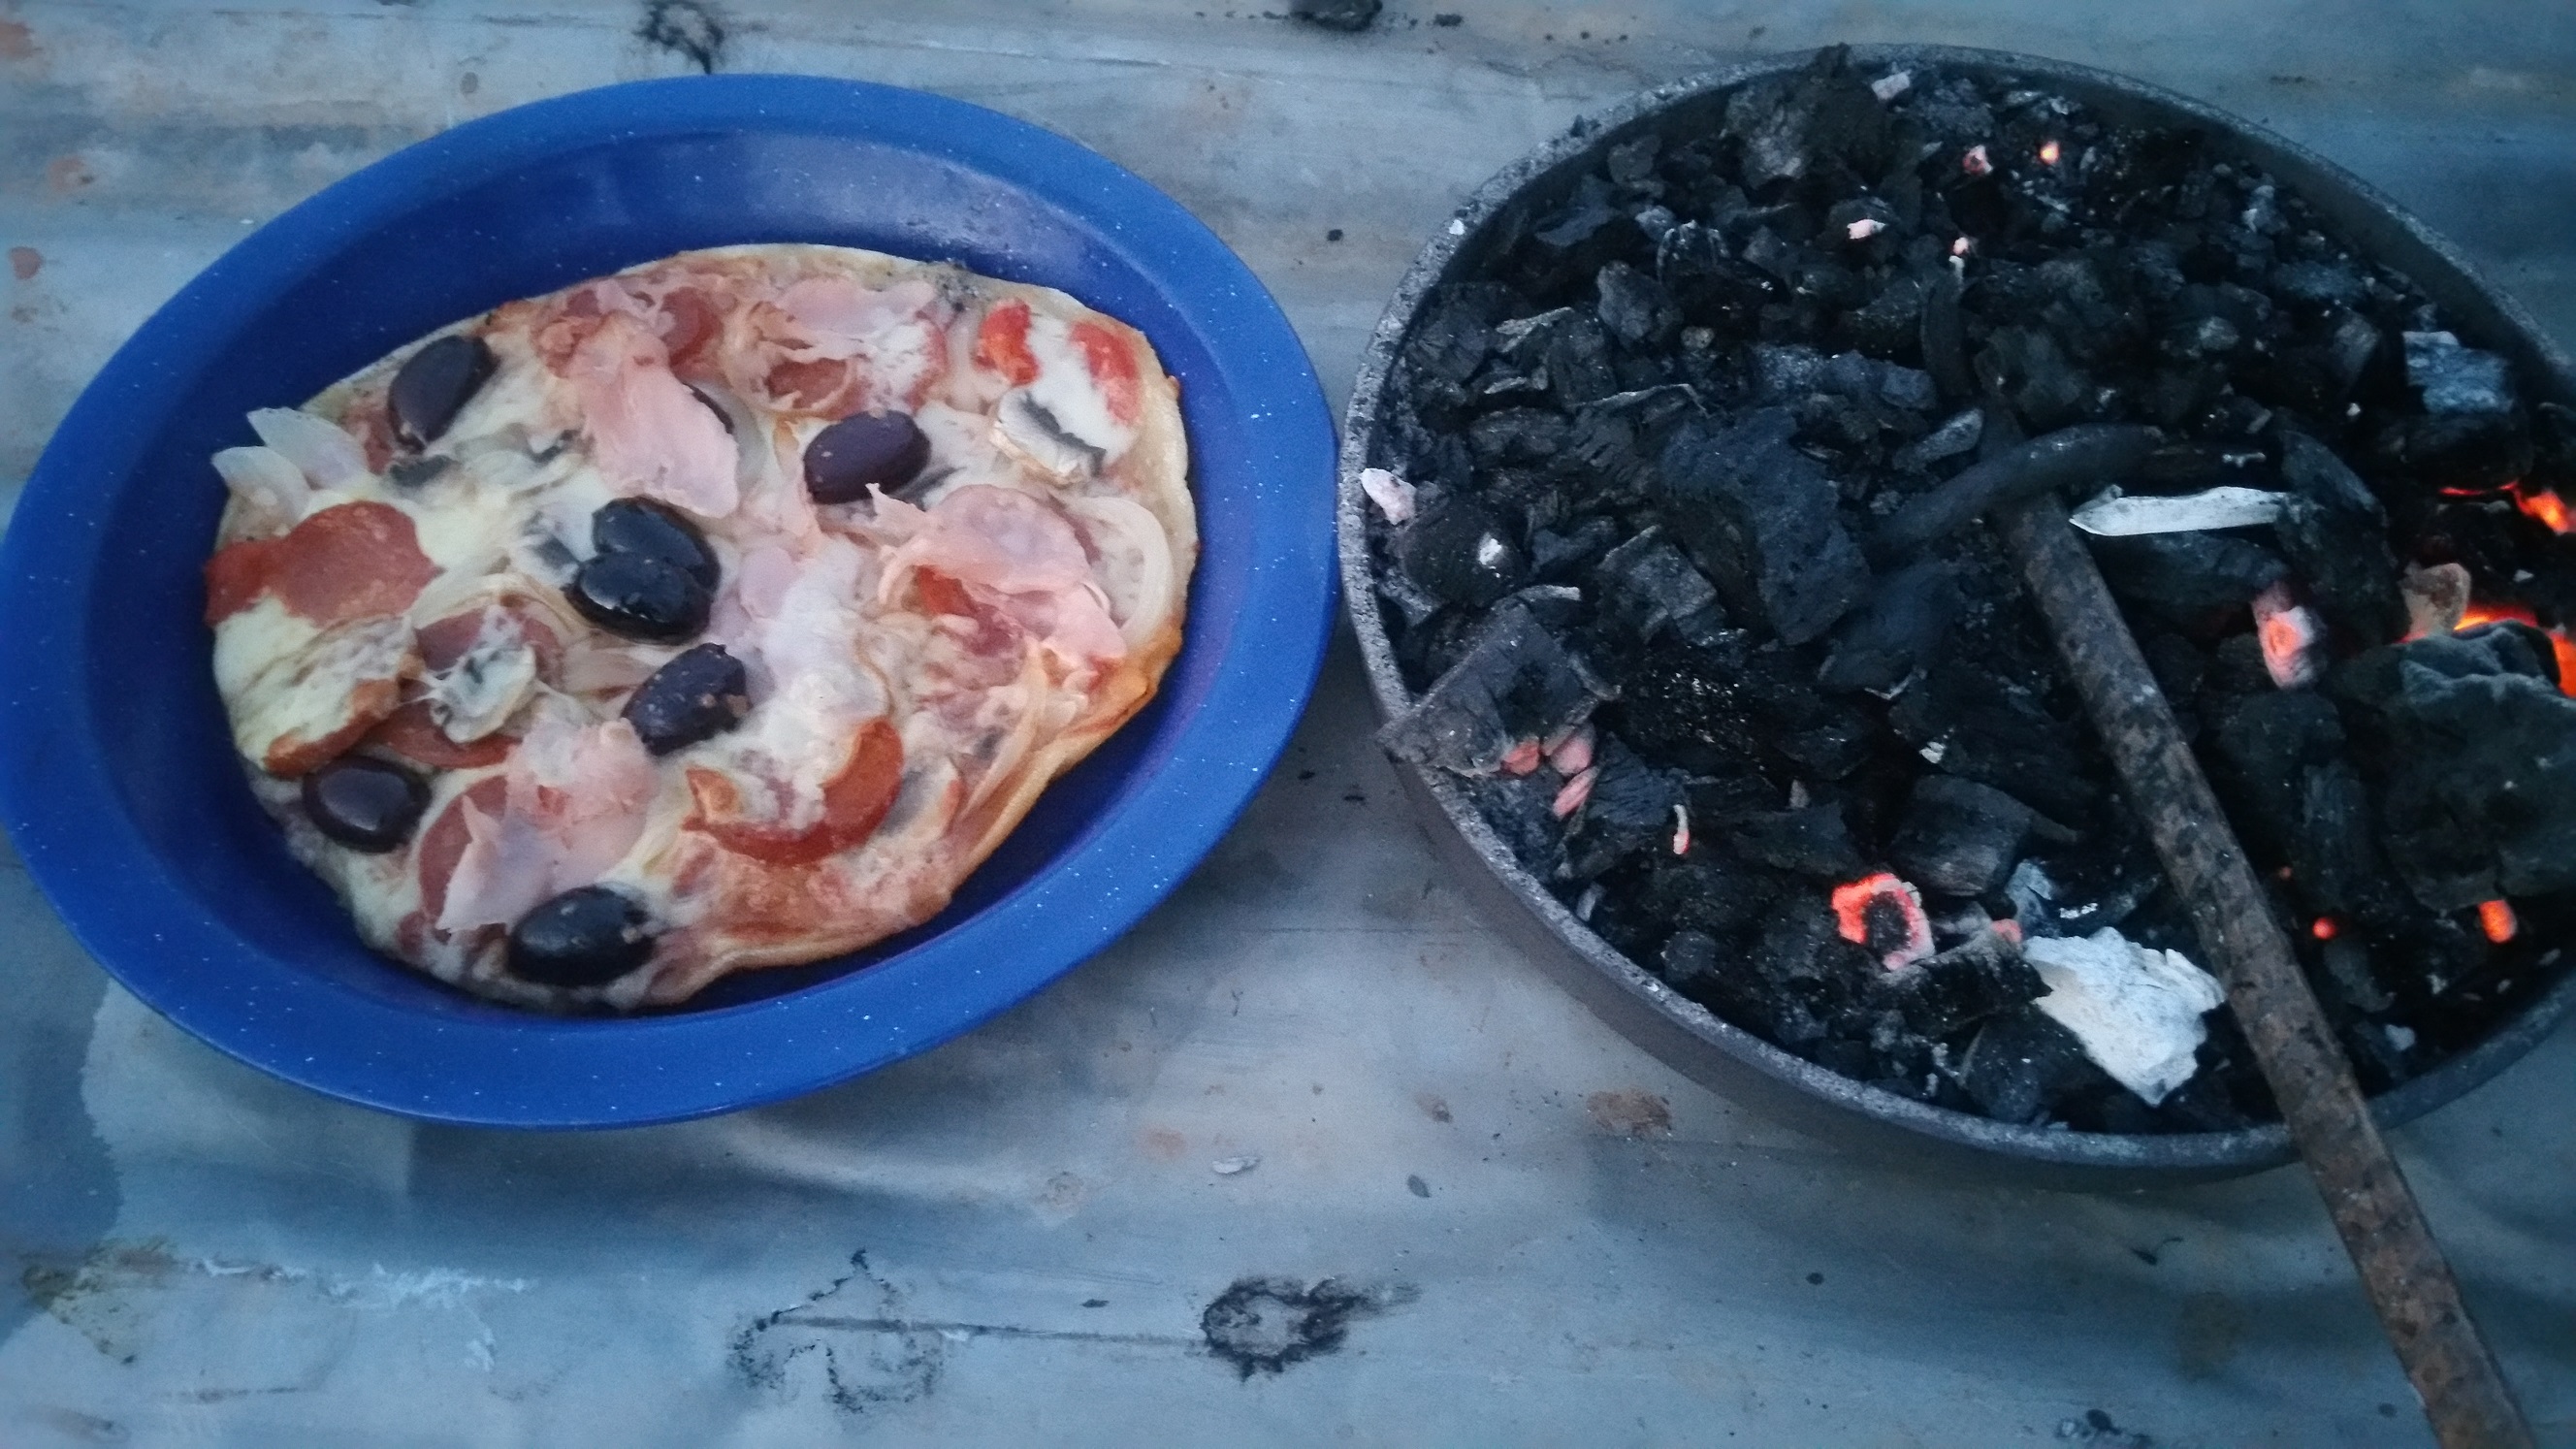 Camp oven pizza 2.jpg